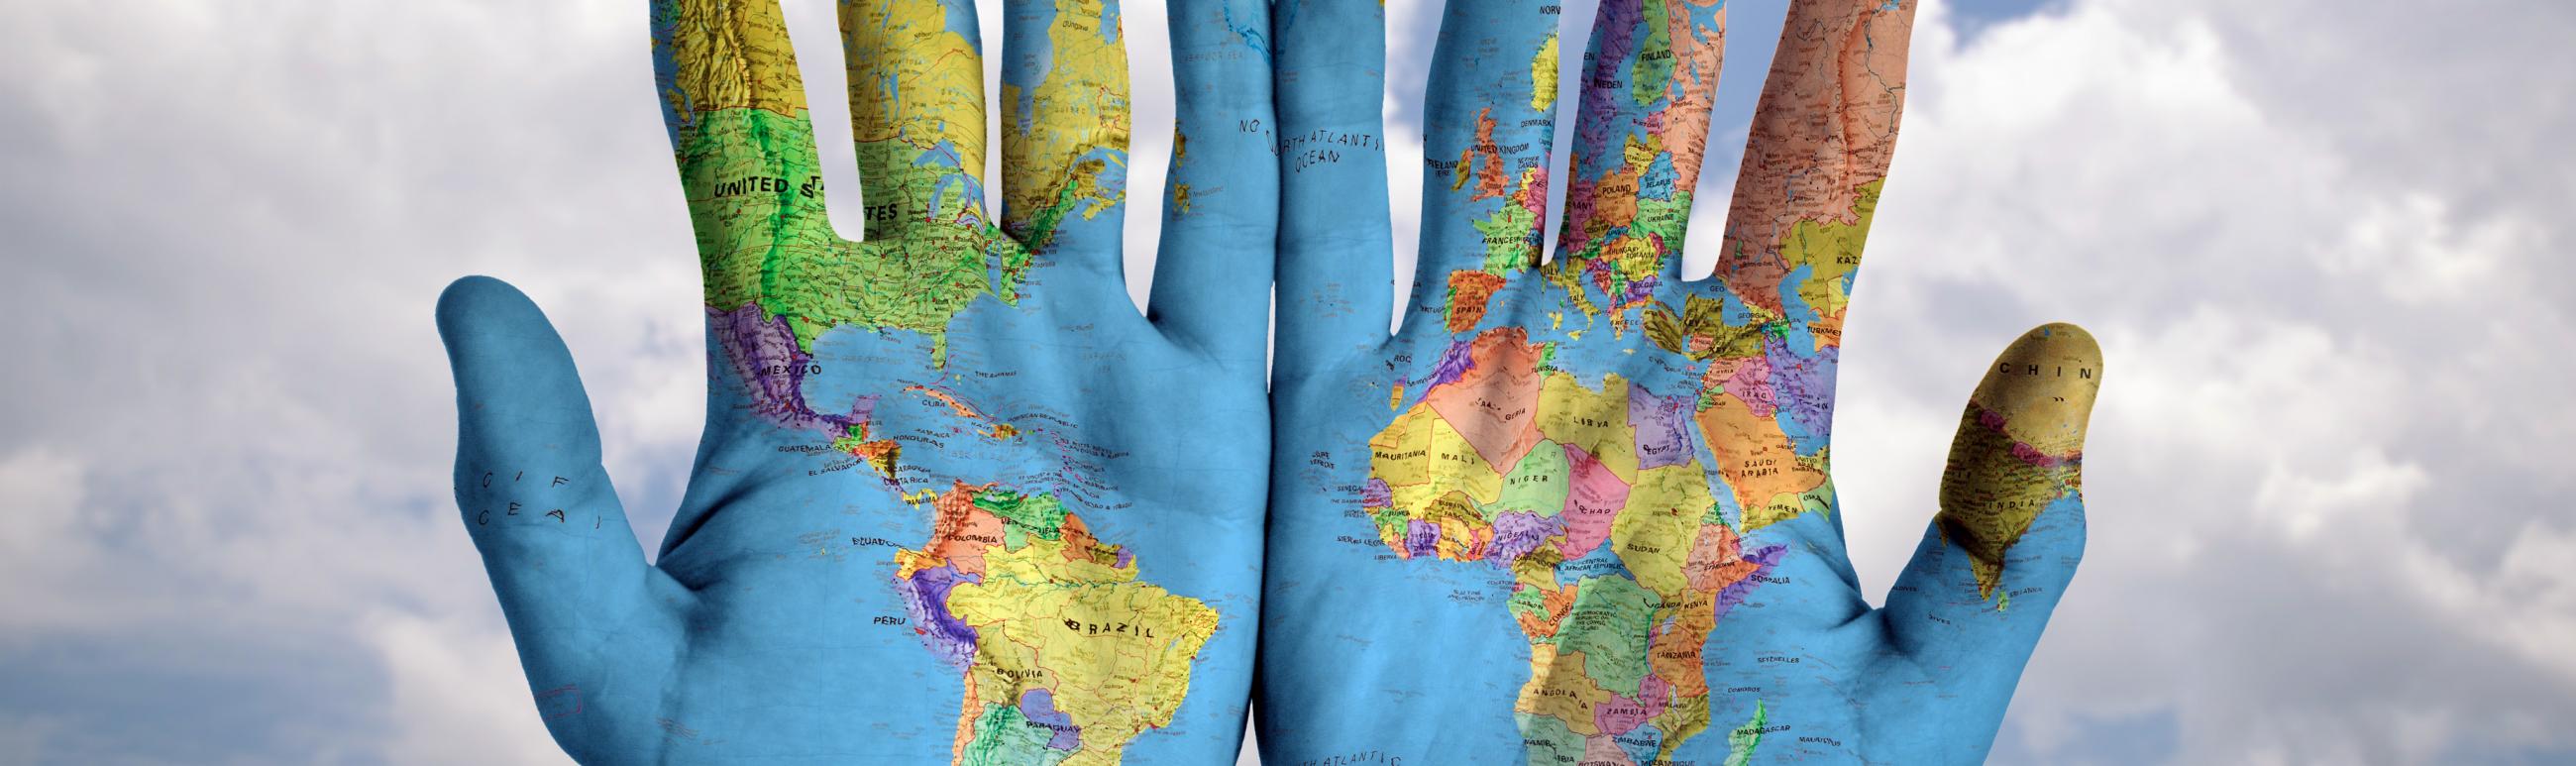 World of the map on hands